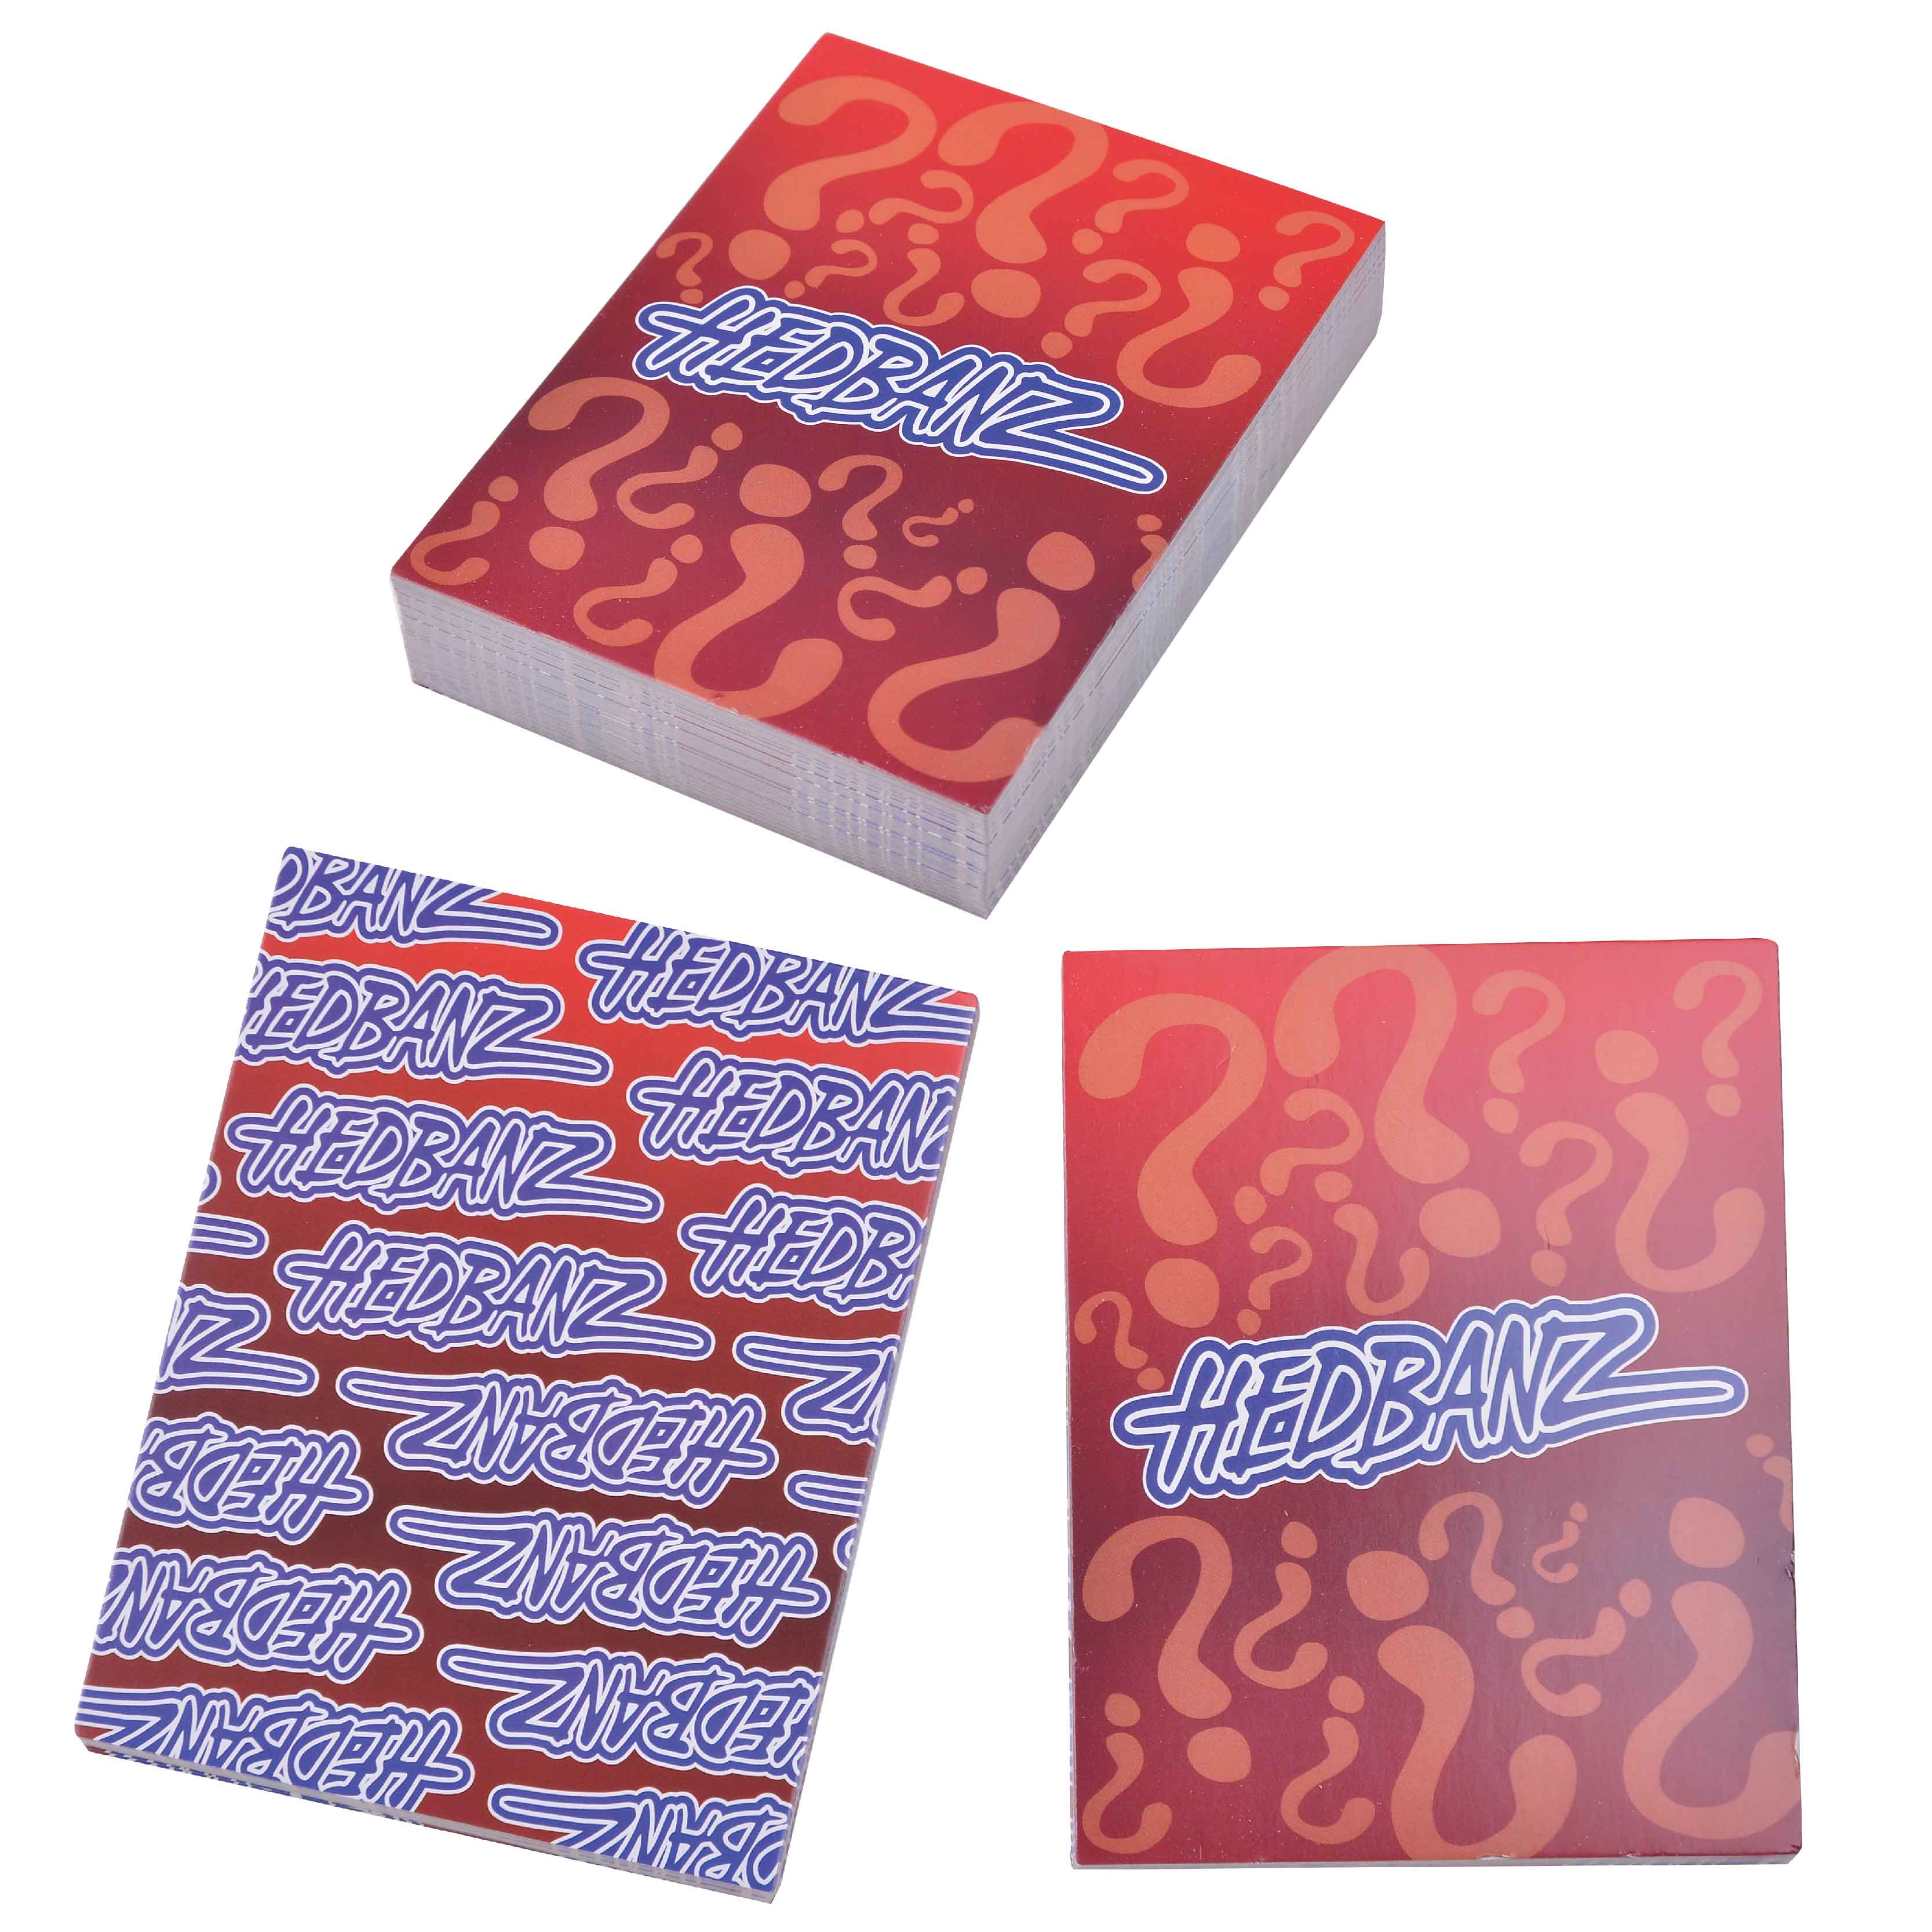 Flashcards for kids education with varnishing and heat shring packaging